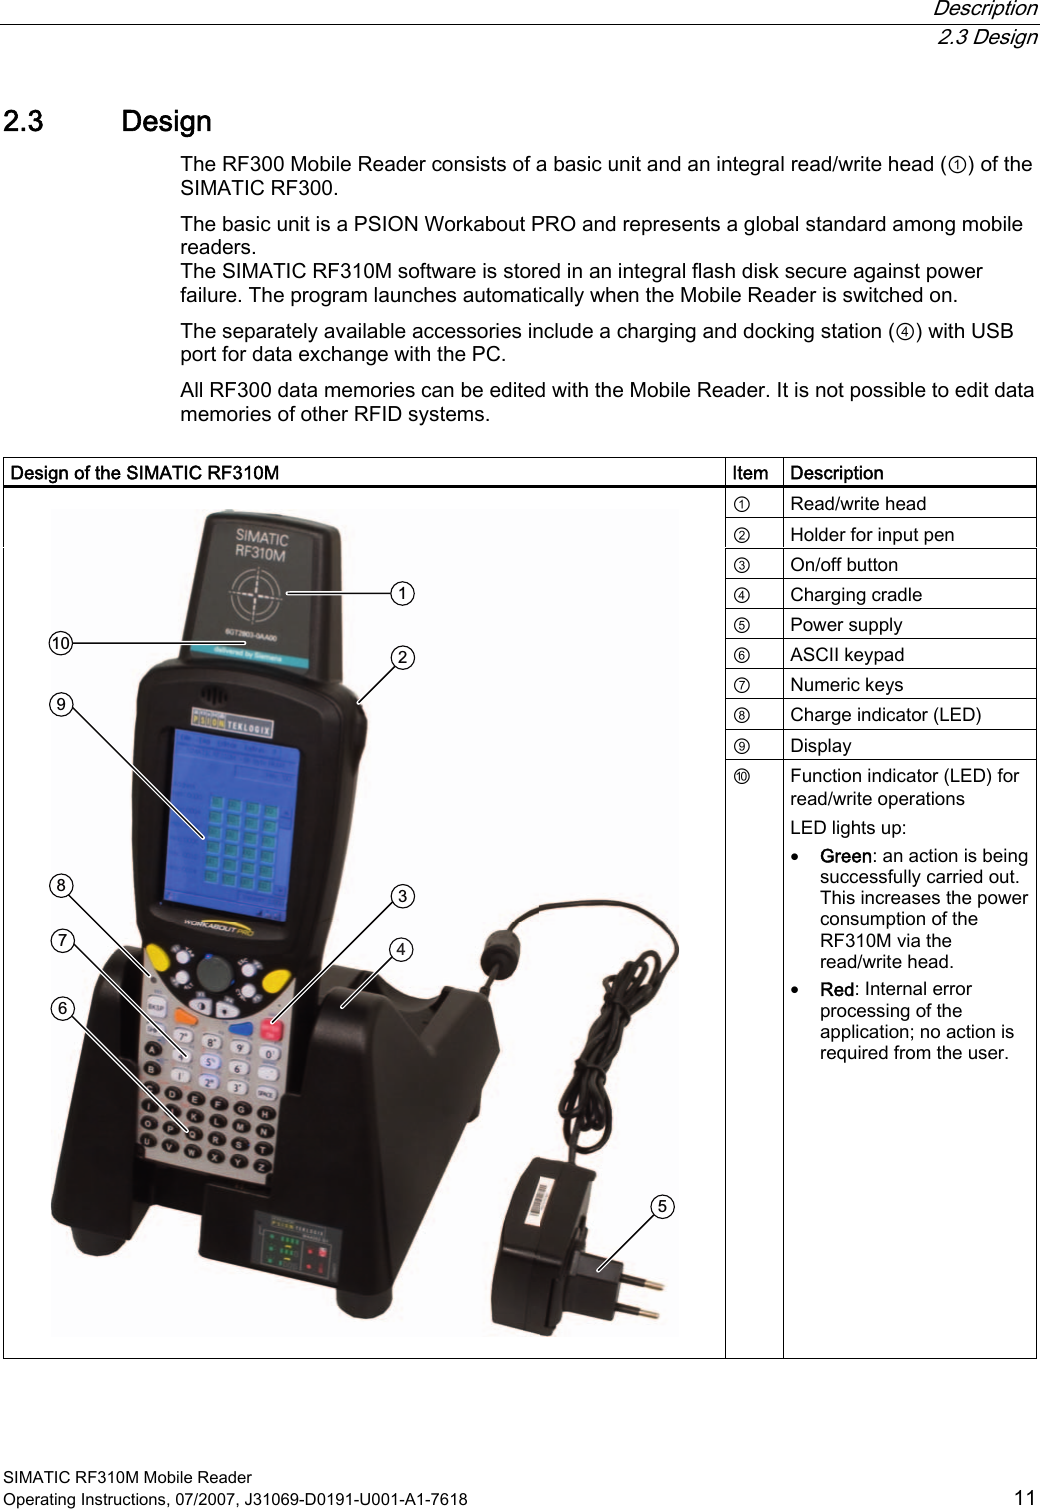  Description  2.3 Design SIMATIC RF310M Mobile Reader Operating Instructions, 07/2007, J31069-D0191-U001-A1-7618  11 2.3 Design The RF300 Mobile Reader consists of a basic unit and an integral read/write head (①) of the SIMATIC RF300.  The basic unit is a PSION Workabout PRO and represents a global standard among mobile readers.  The SIMATIC RF310M software is stored in an integral flash disk secure against power failure. The program launches automatically when the Mobile Reader is switched on. The separately available accessories include a charging and docking station (④) with USB port for data exchange with the PC.  All RF300 data memories can be edited with the Mobile Reader. It is not possible to edit data memories of other RFID systems.   Design of the SIMATIC RF310M  Item  Description ①  Read/write head ②  Holder for input pen ③  On/off button ④  Charging cradle ⑤  Power supply ⑥  ASCII keypad ⑦  Numeric keys ⑧  Charge indicator (LED) ⑨  Display    ⑩  Function indicator (LED) for read/write operations LED lights up: • Green: an action is being successfully carried out.This increases the power consumption of the RF310M via the read/write head. • Red: Internal error processing of the application; no action is required from the user.   